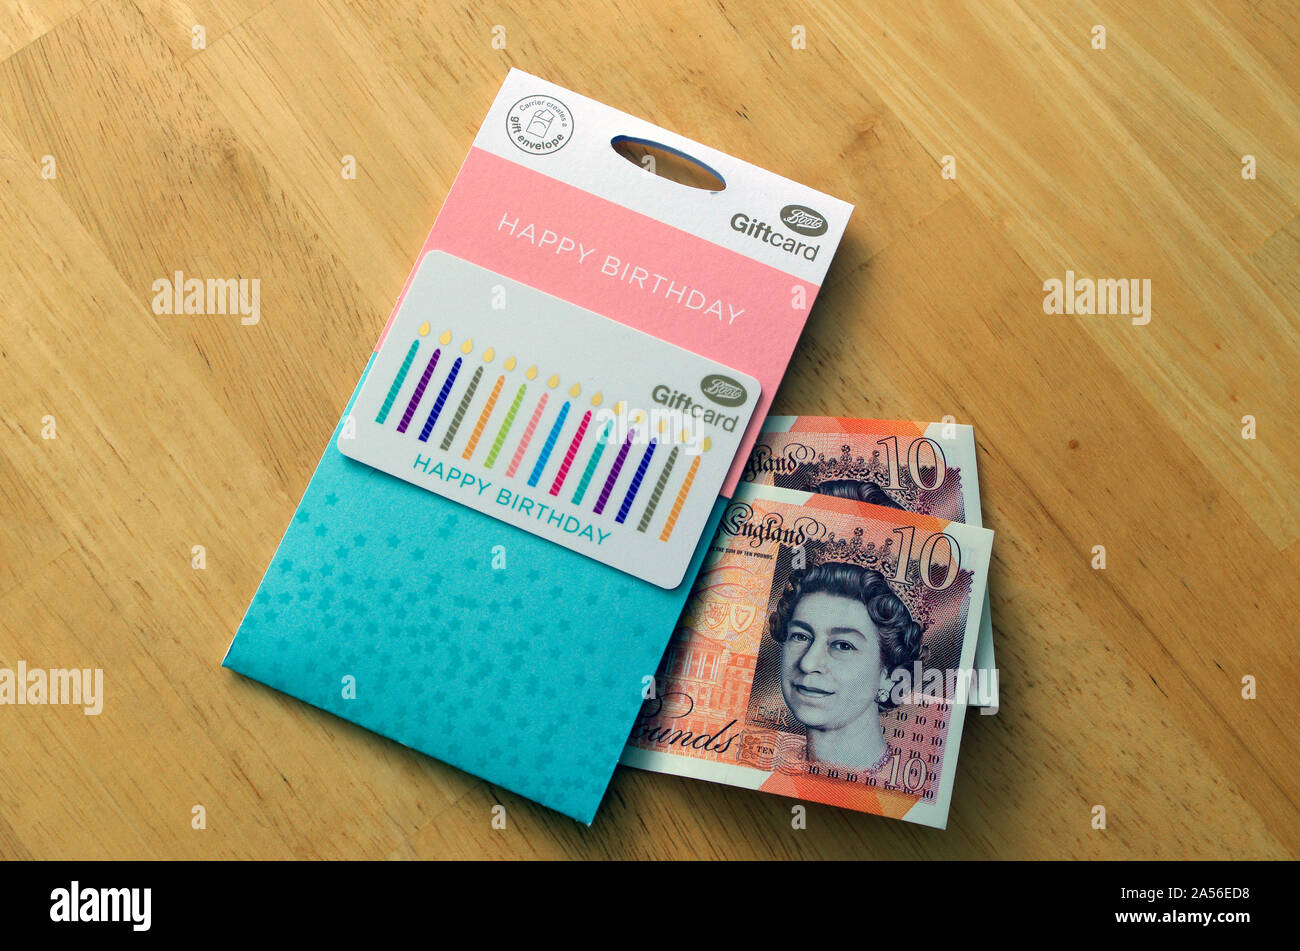 Boots the Chemist Gift Voucher or Card With Ten Pound Notes Money, UK Stock Photo